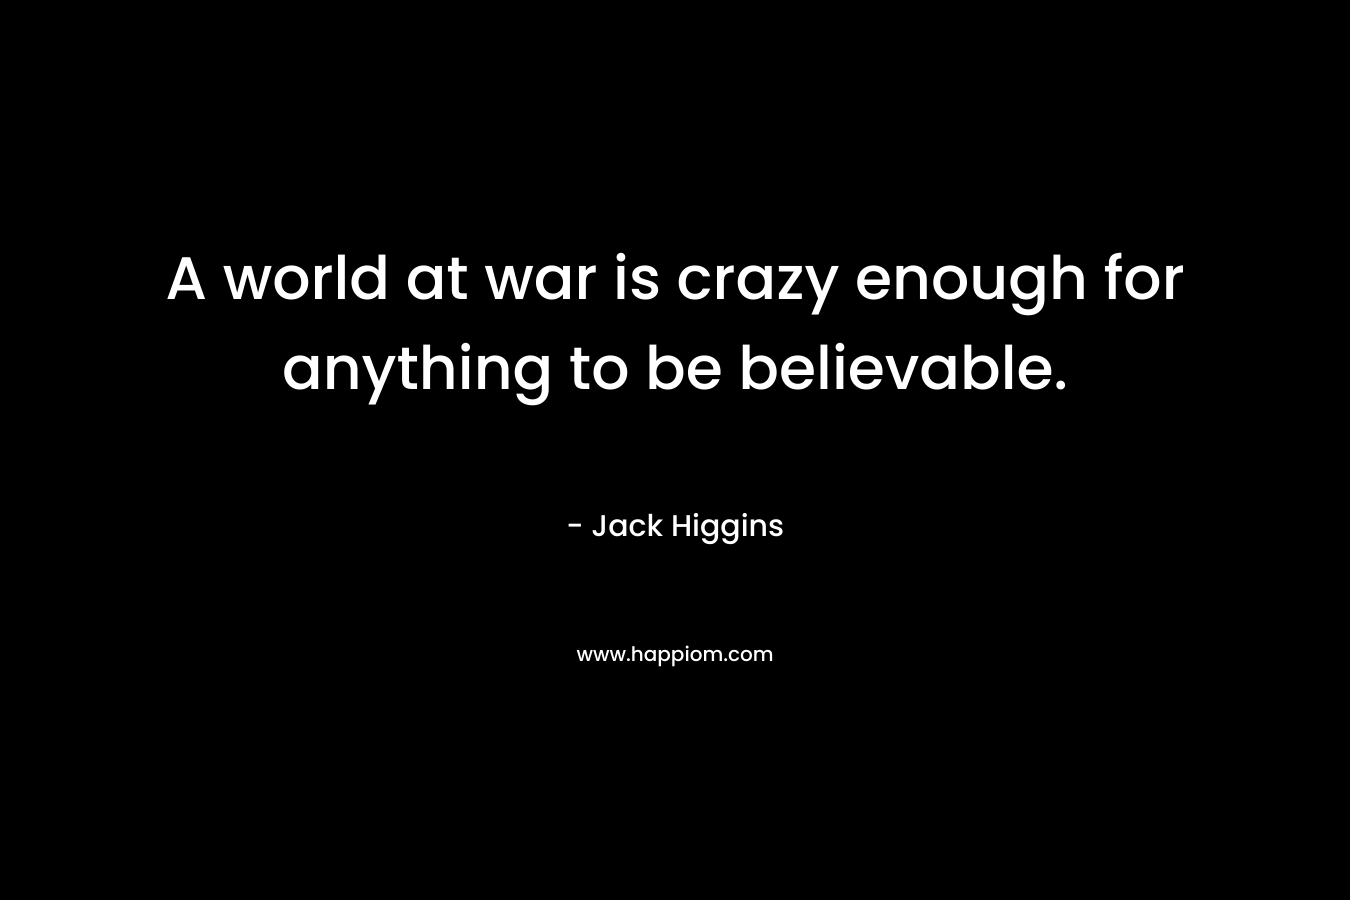 A world at war is crazy enough for anything to be believable.